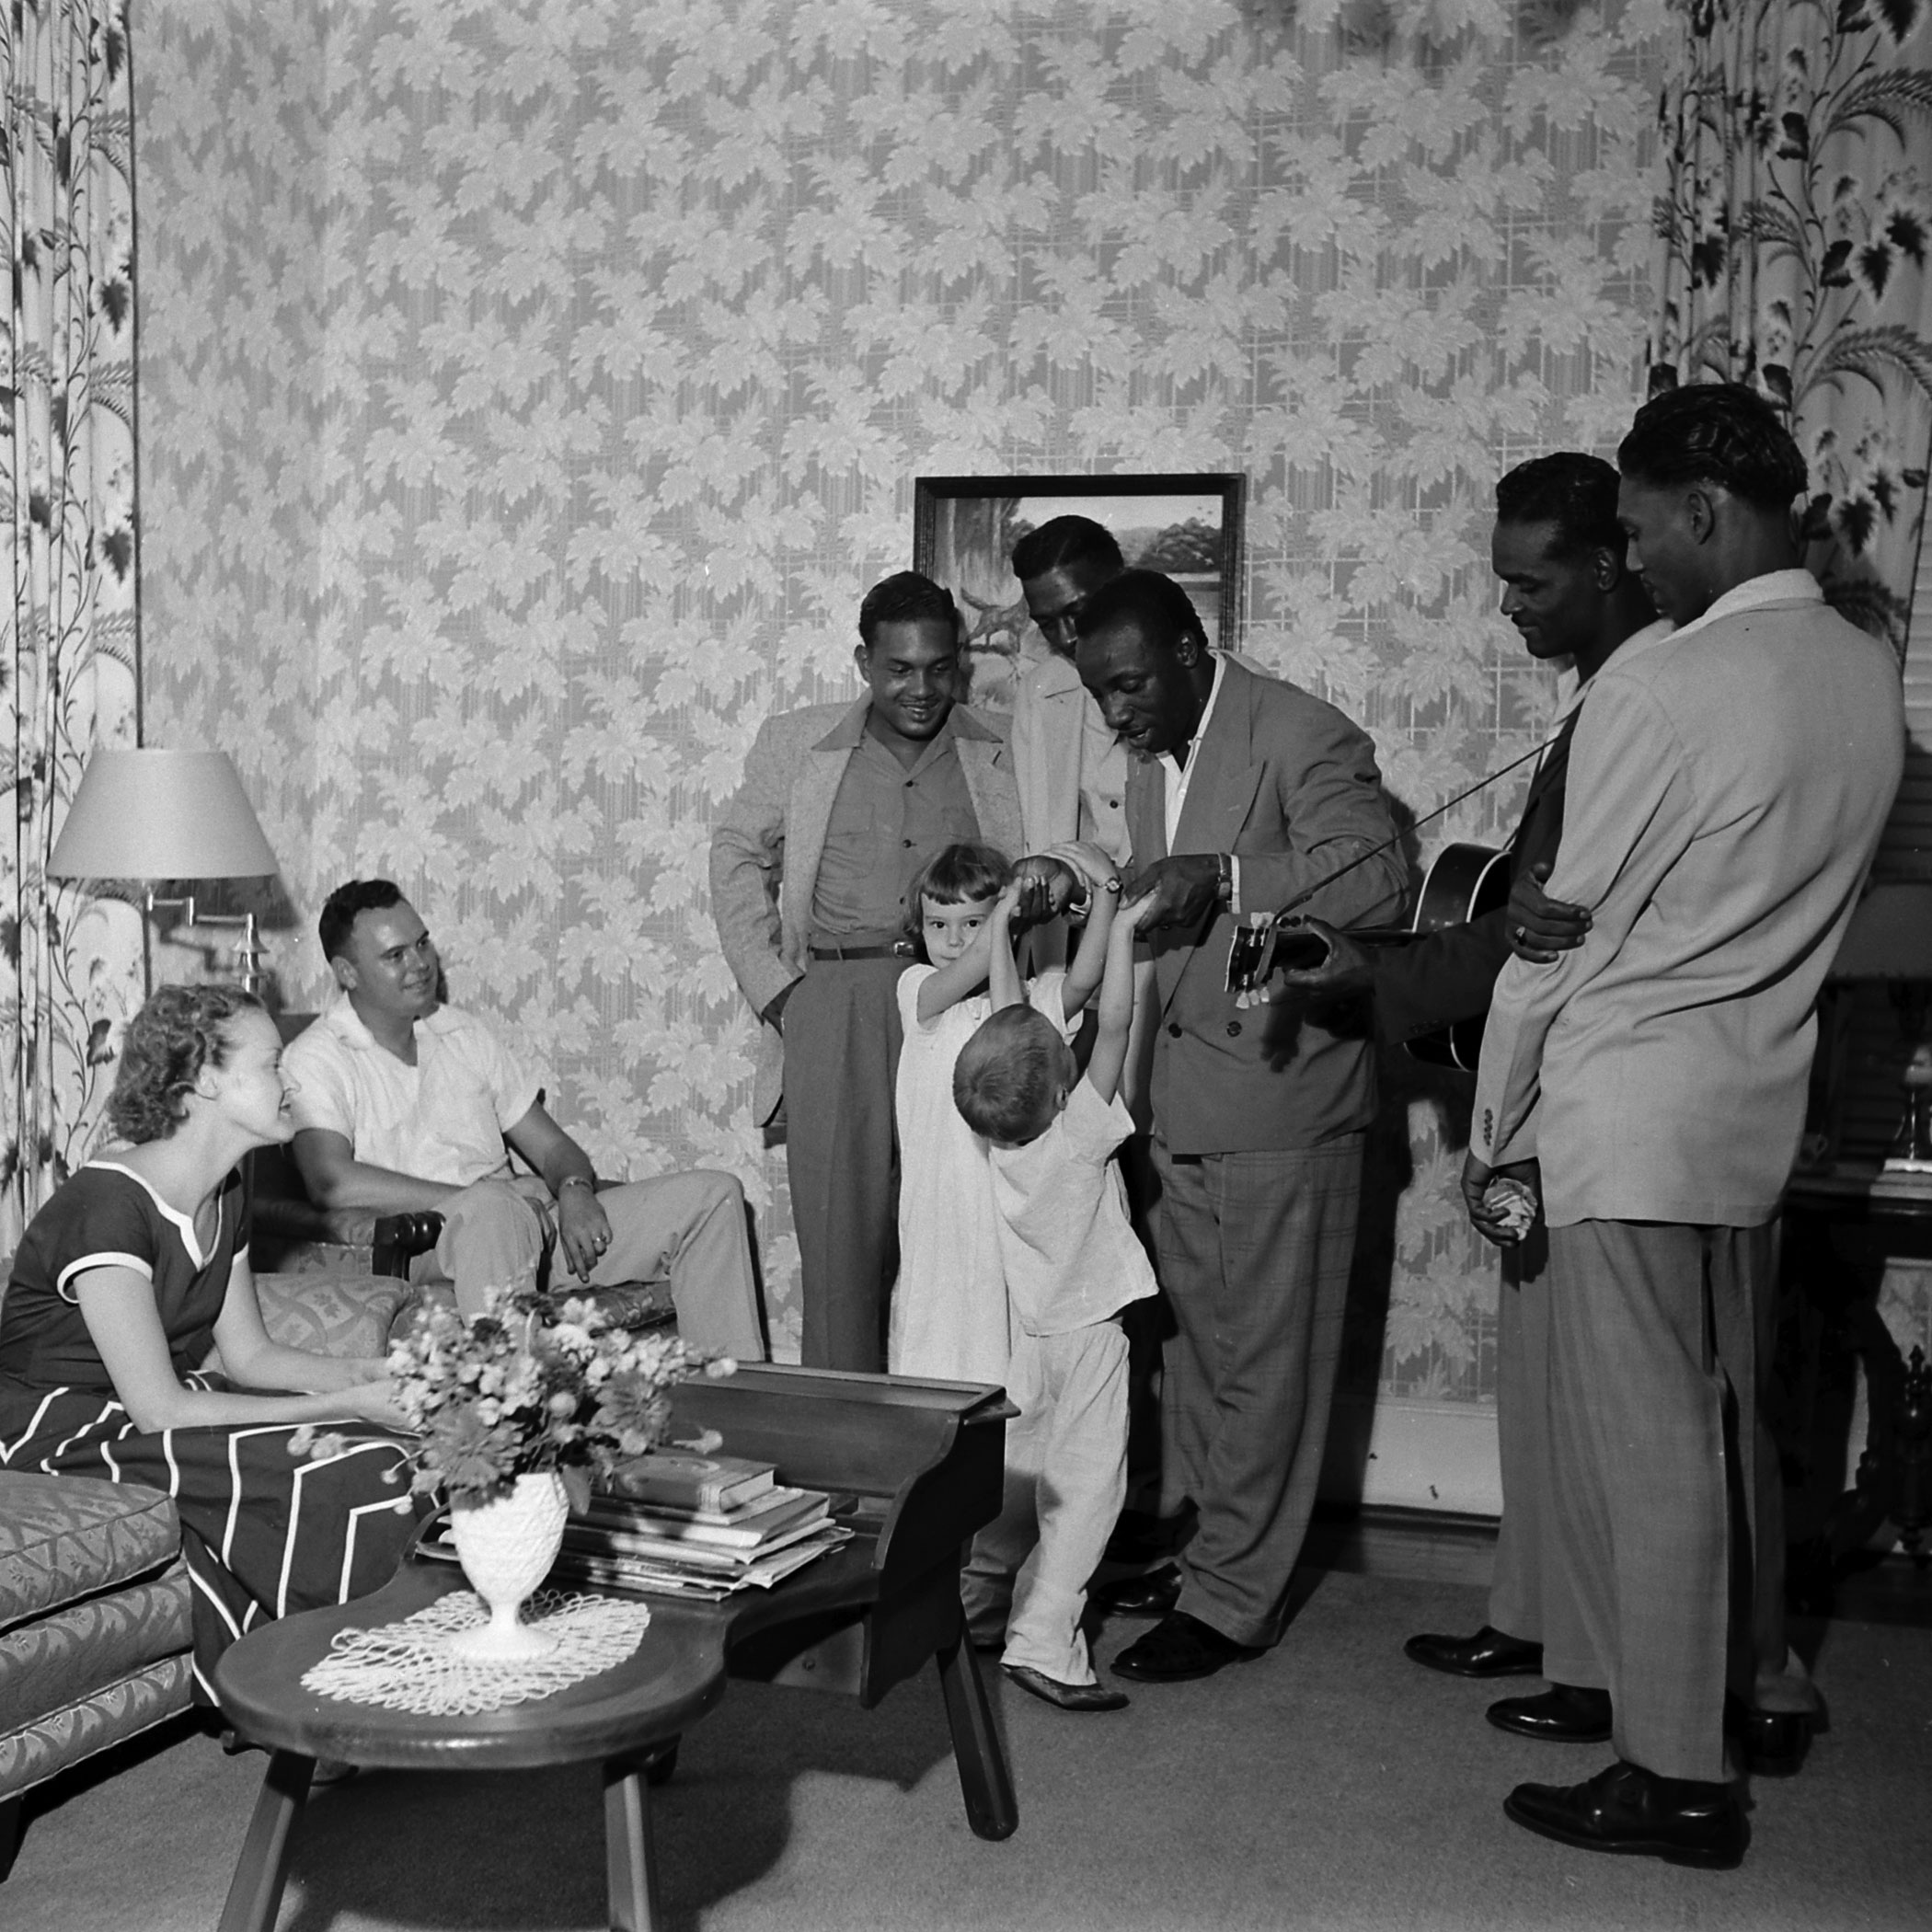 The Prisonaires perform at Tennessee State Penitentiary warden James Edwards' home, Nashville, Tenn., 1953.